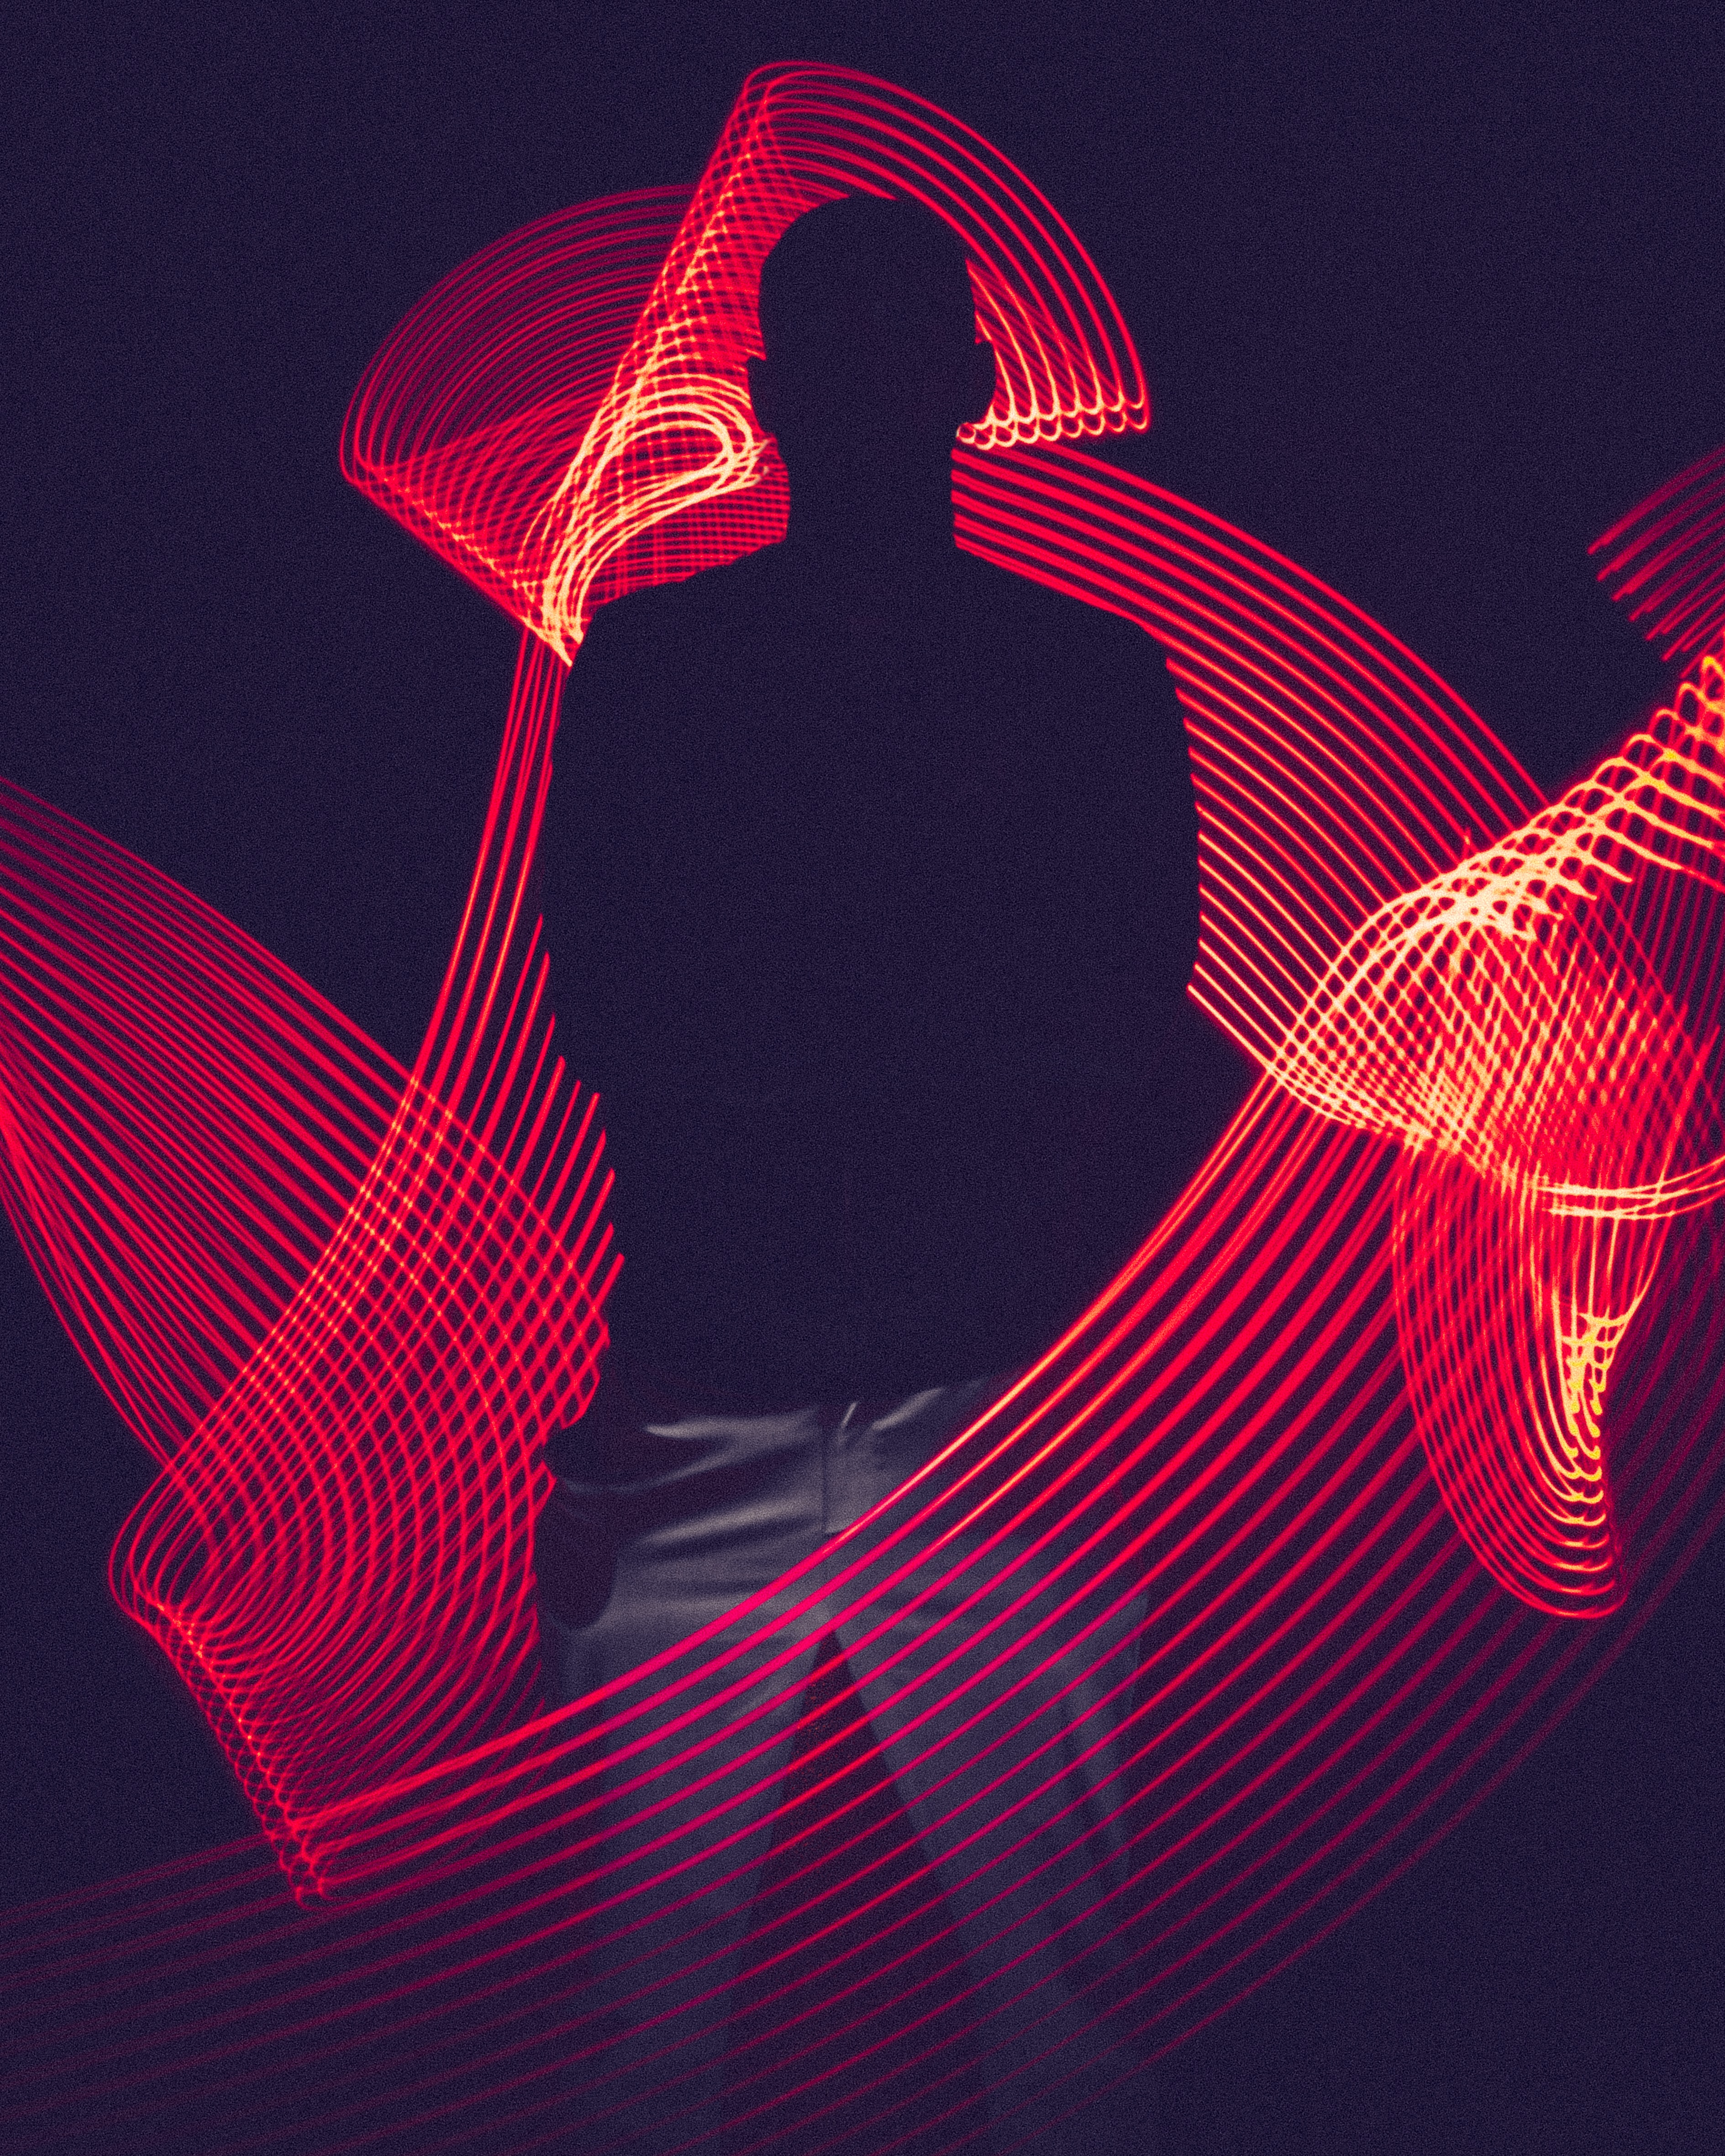 Red Led Light With Silhouette Of A Man · Free